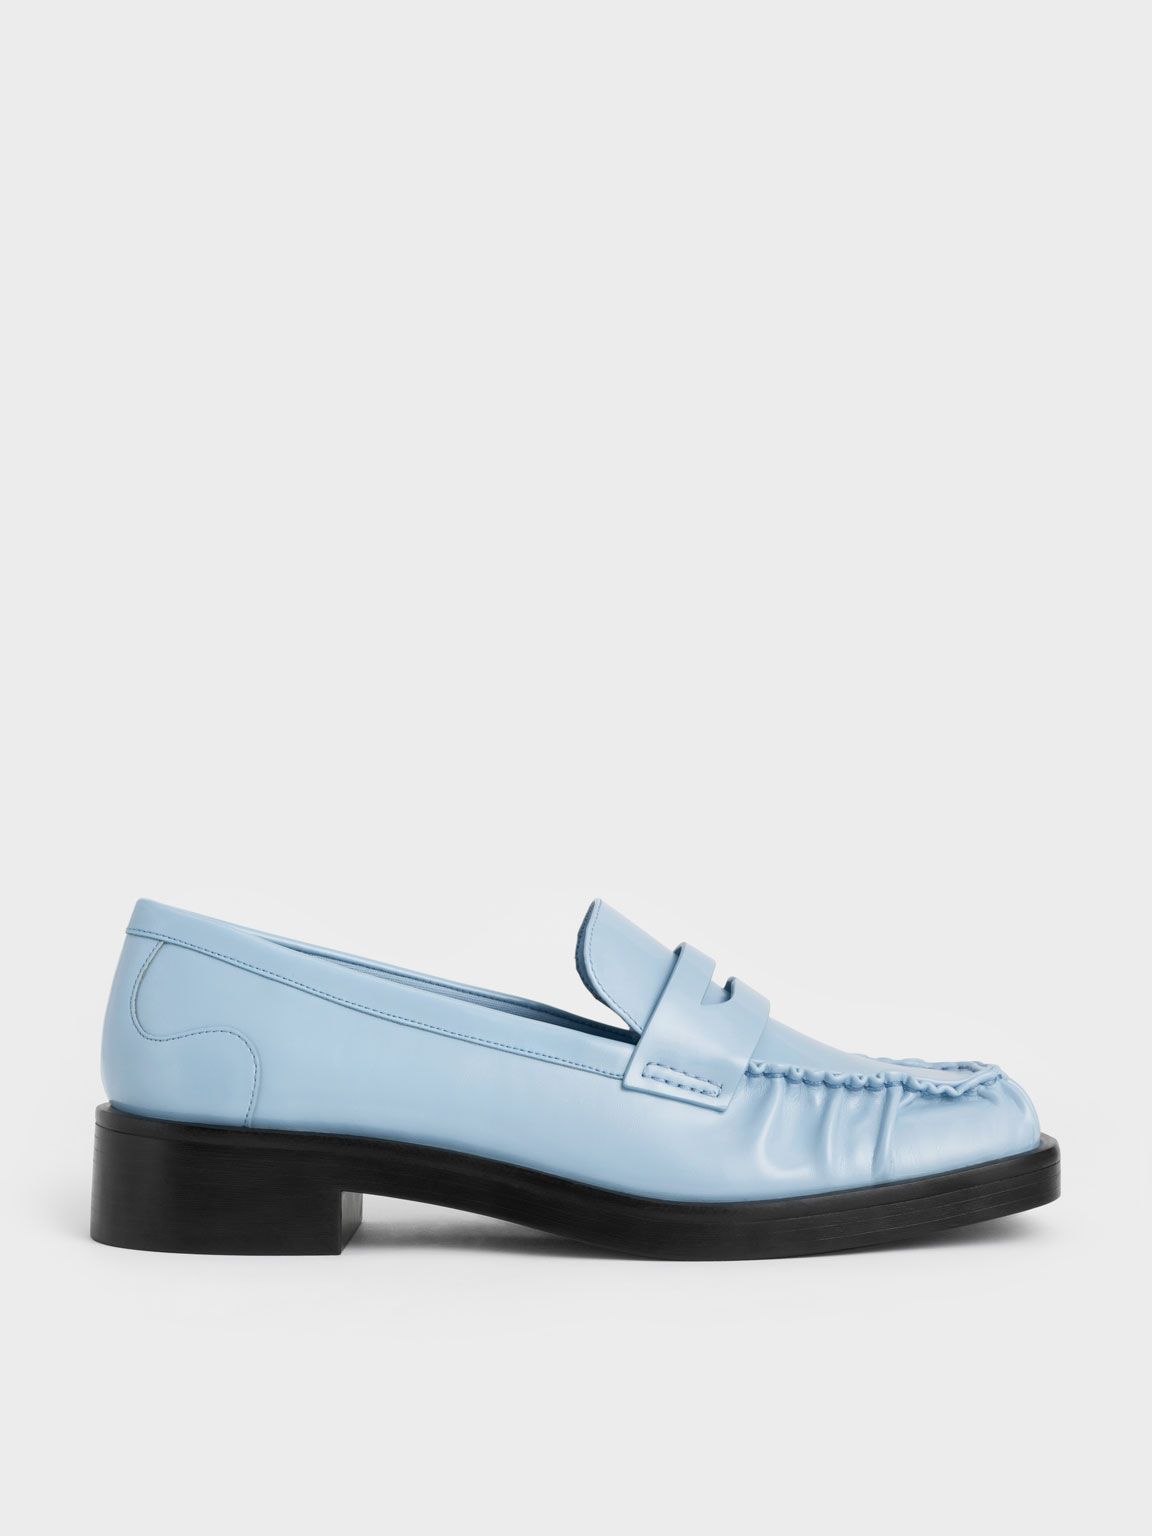 Classic Comfort: Stay Sharp in Blue Loafers